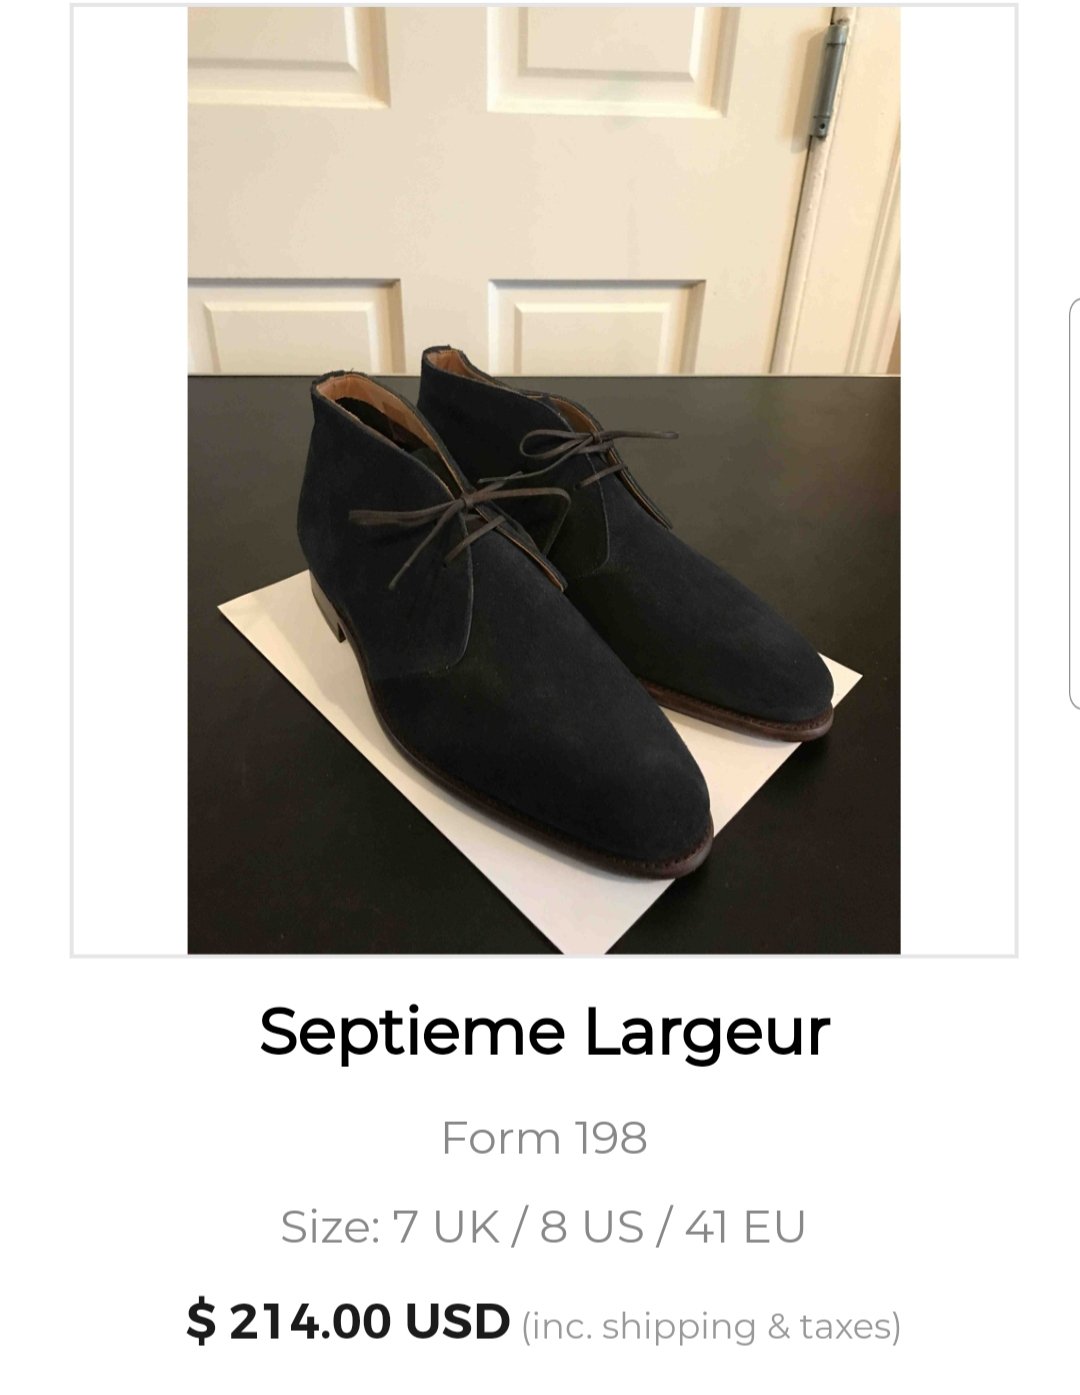 New Shoes on The Marketplace - July 2nd 2019